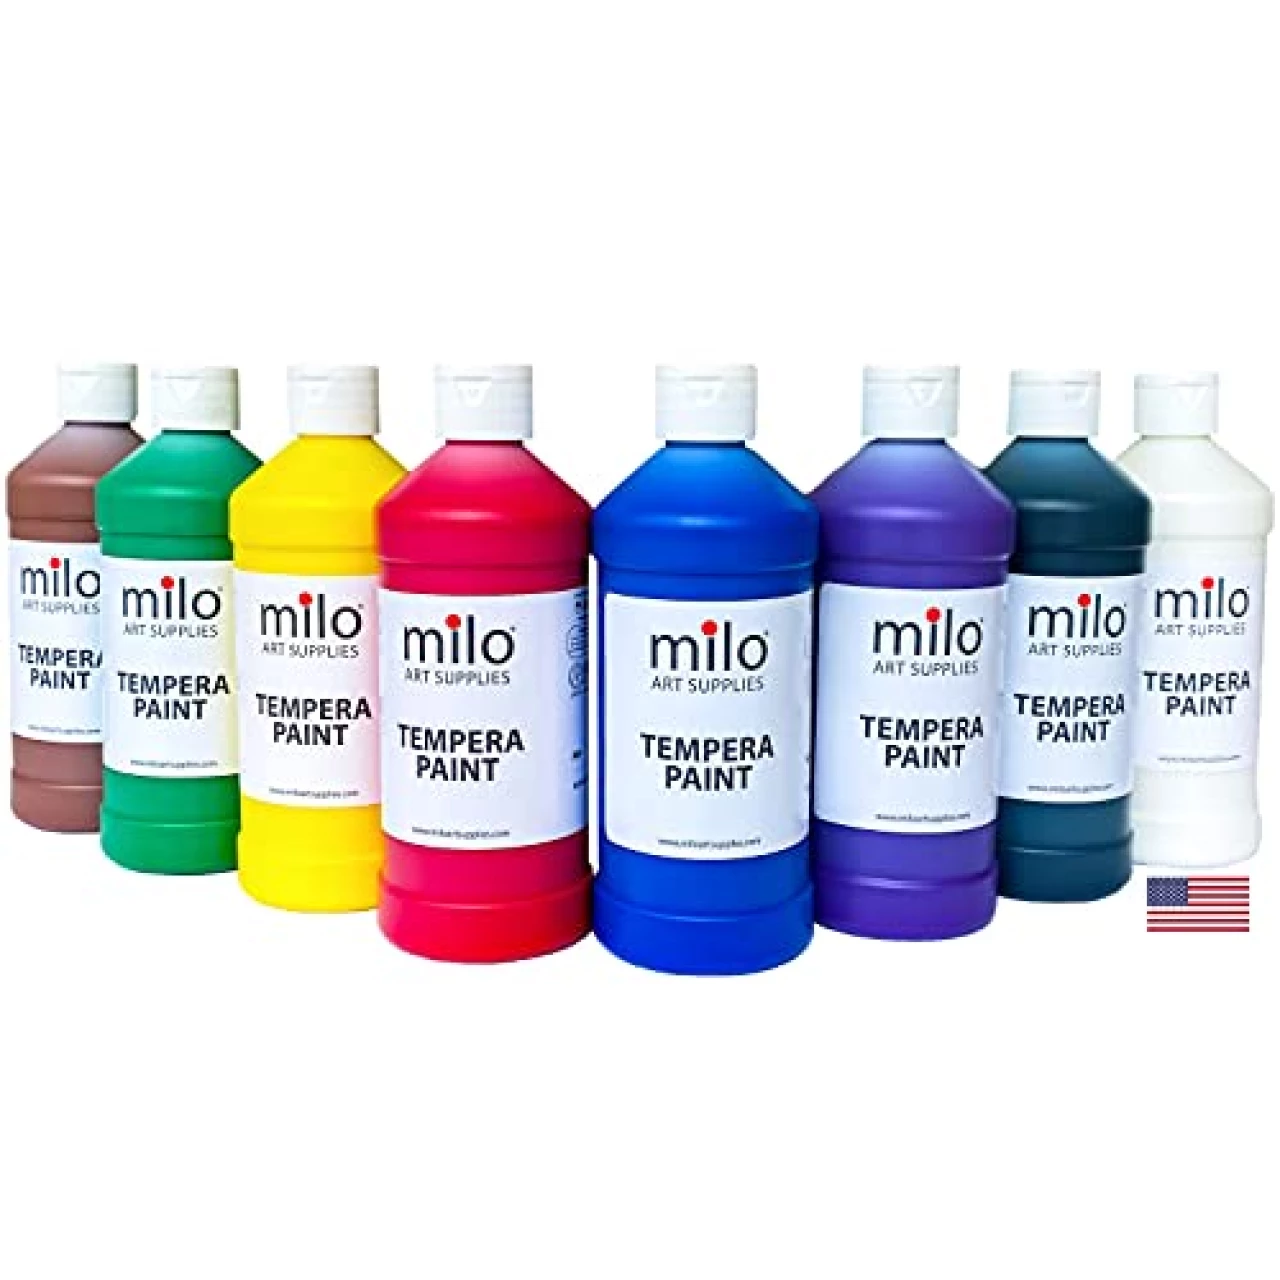 milo Tempera Paint Set of 8 Colors | 16 oz Bottles | Made in the USA | Washable and Non-Toxic Art &amp; Craft Poster Primary Finger Paints for Artists, Kids, &amp; Hobby Painters